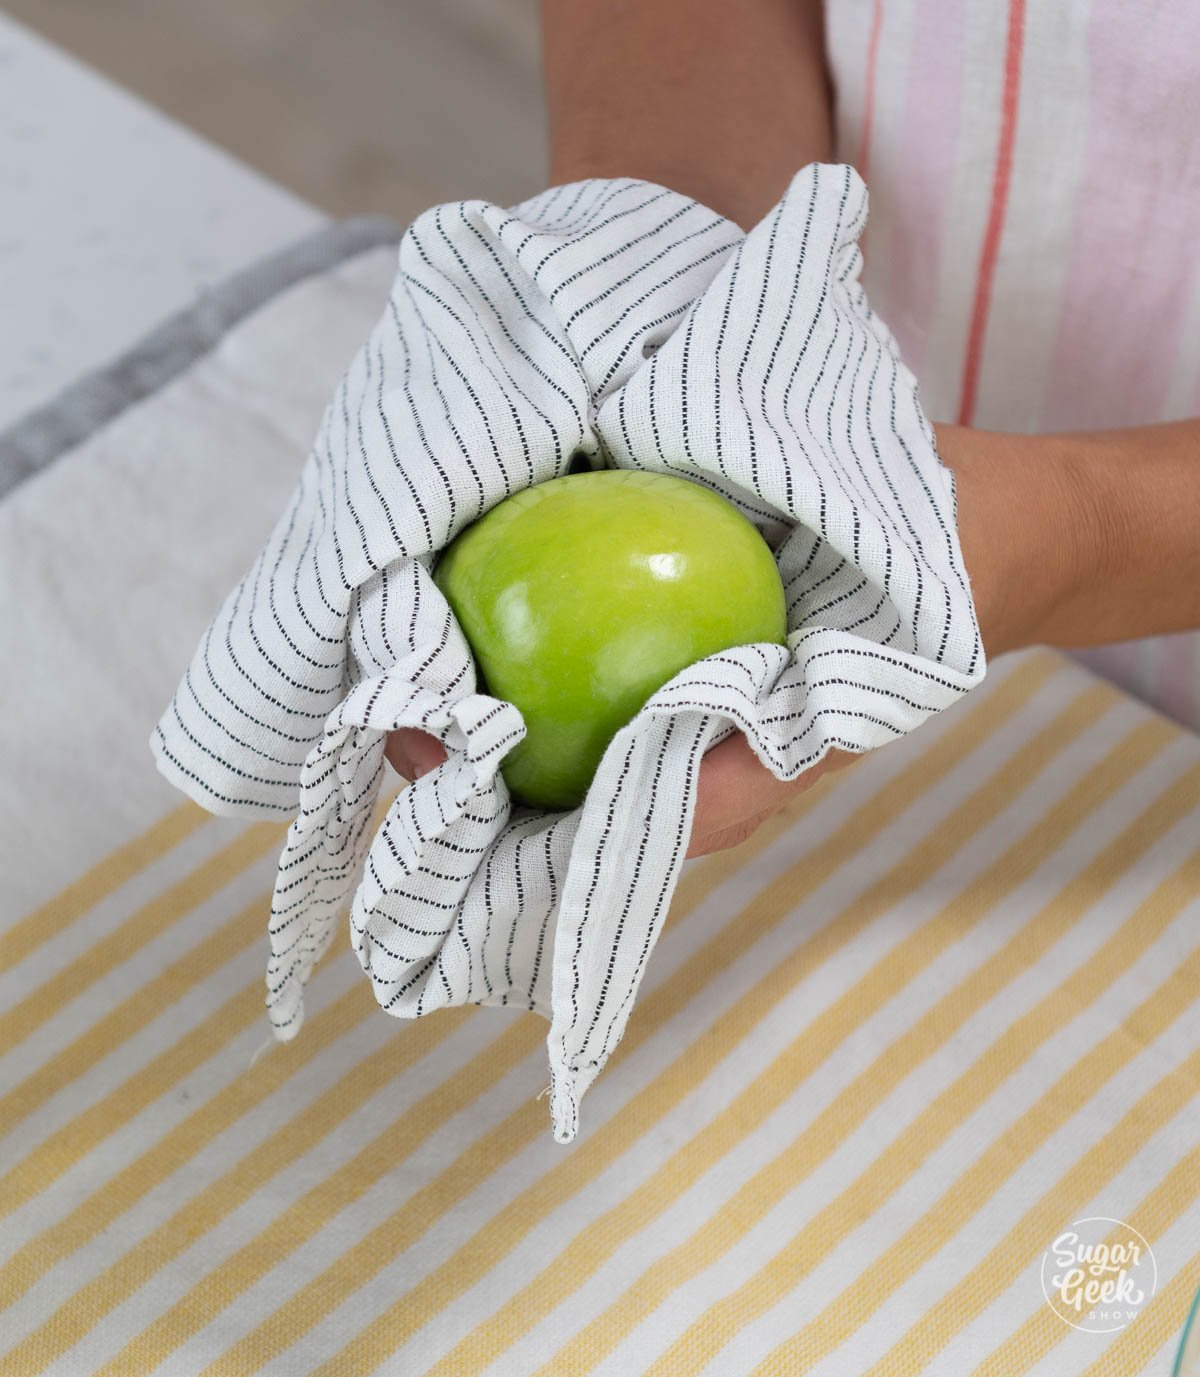 wiping apple with towel